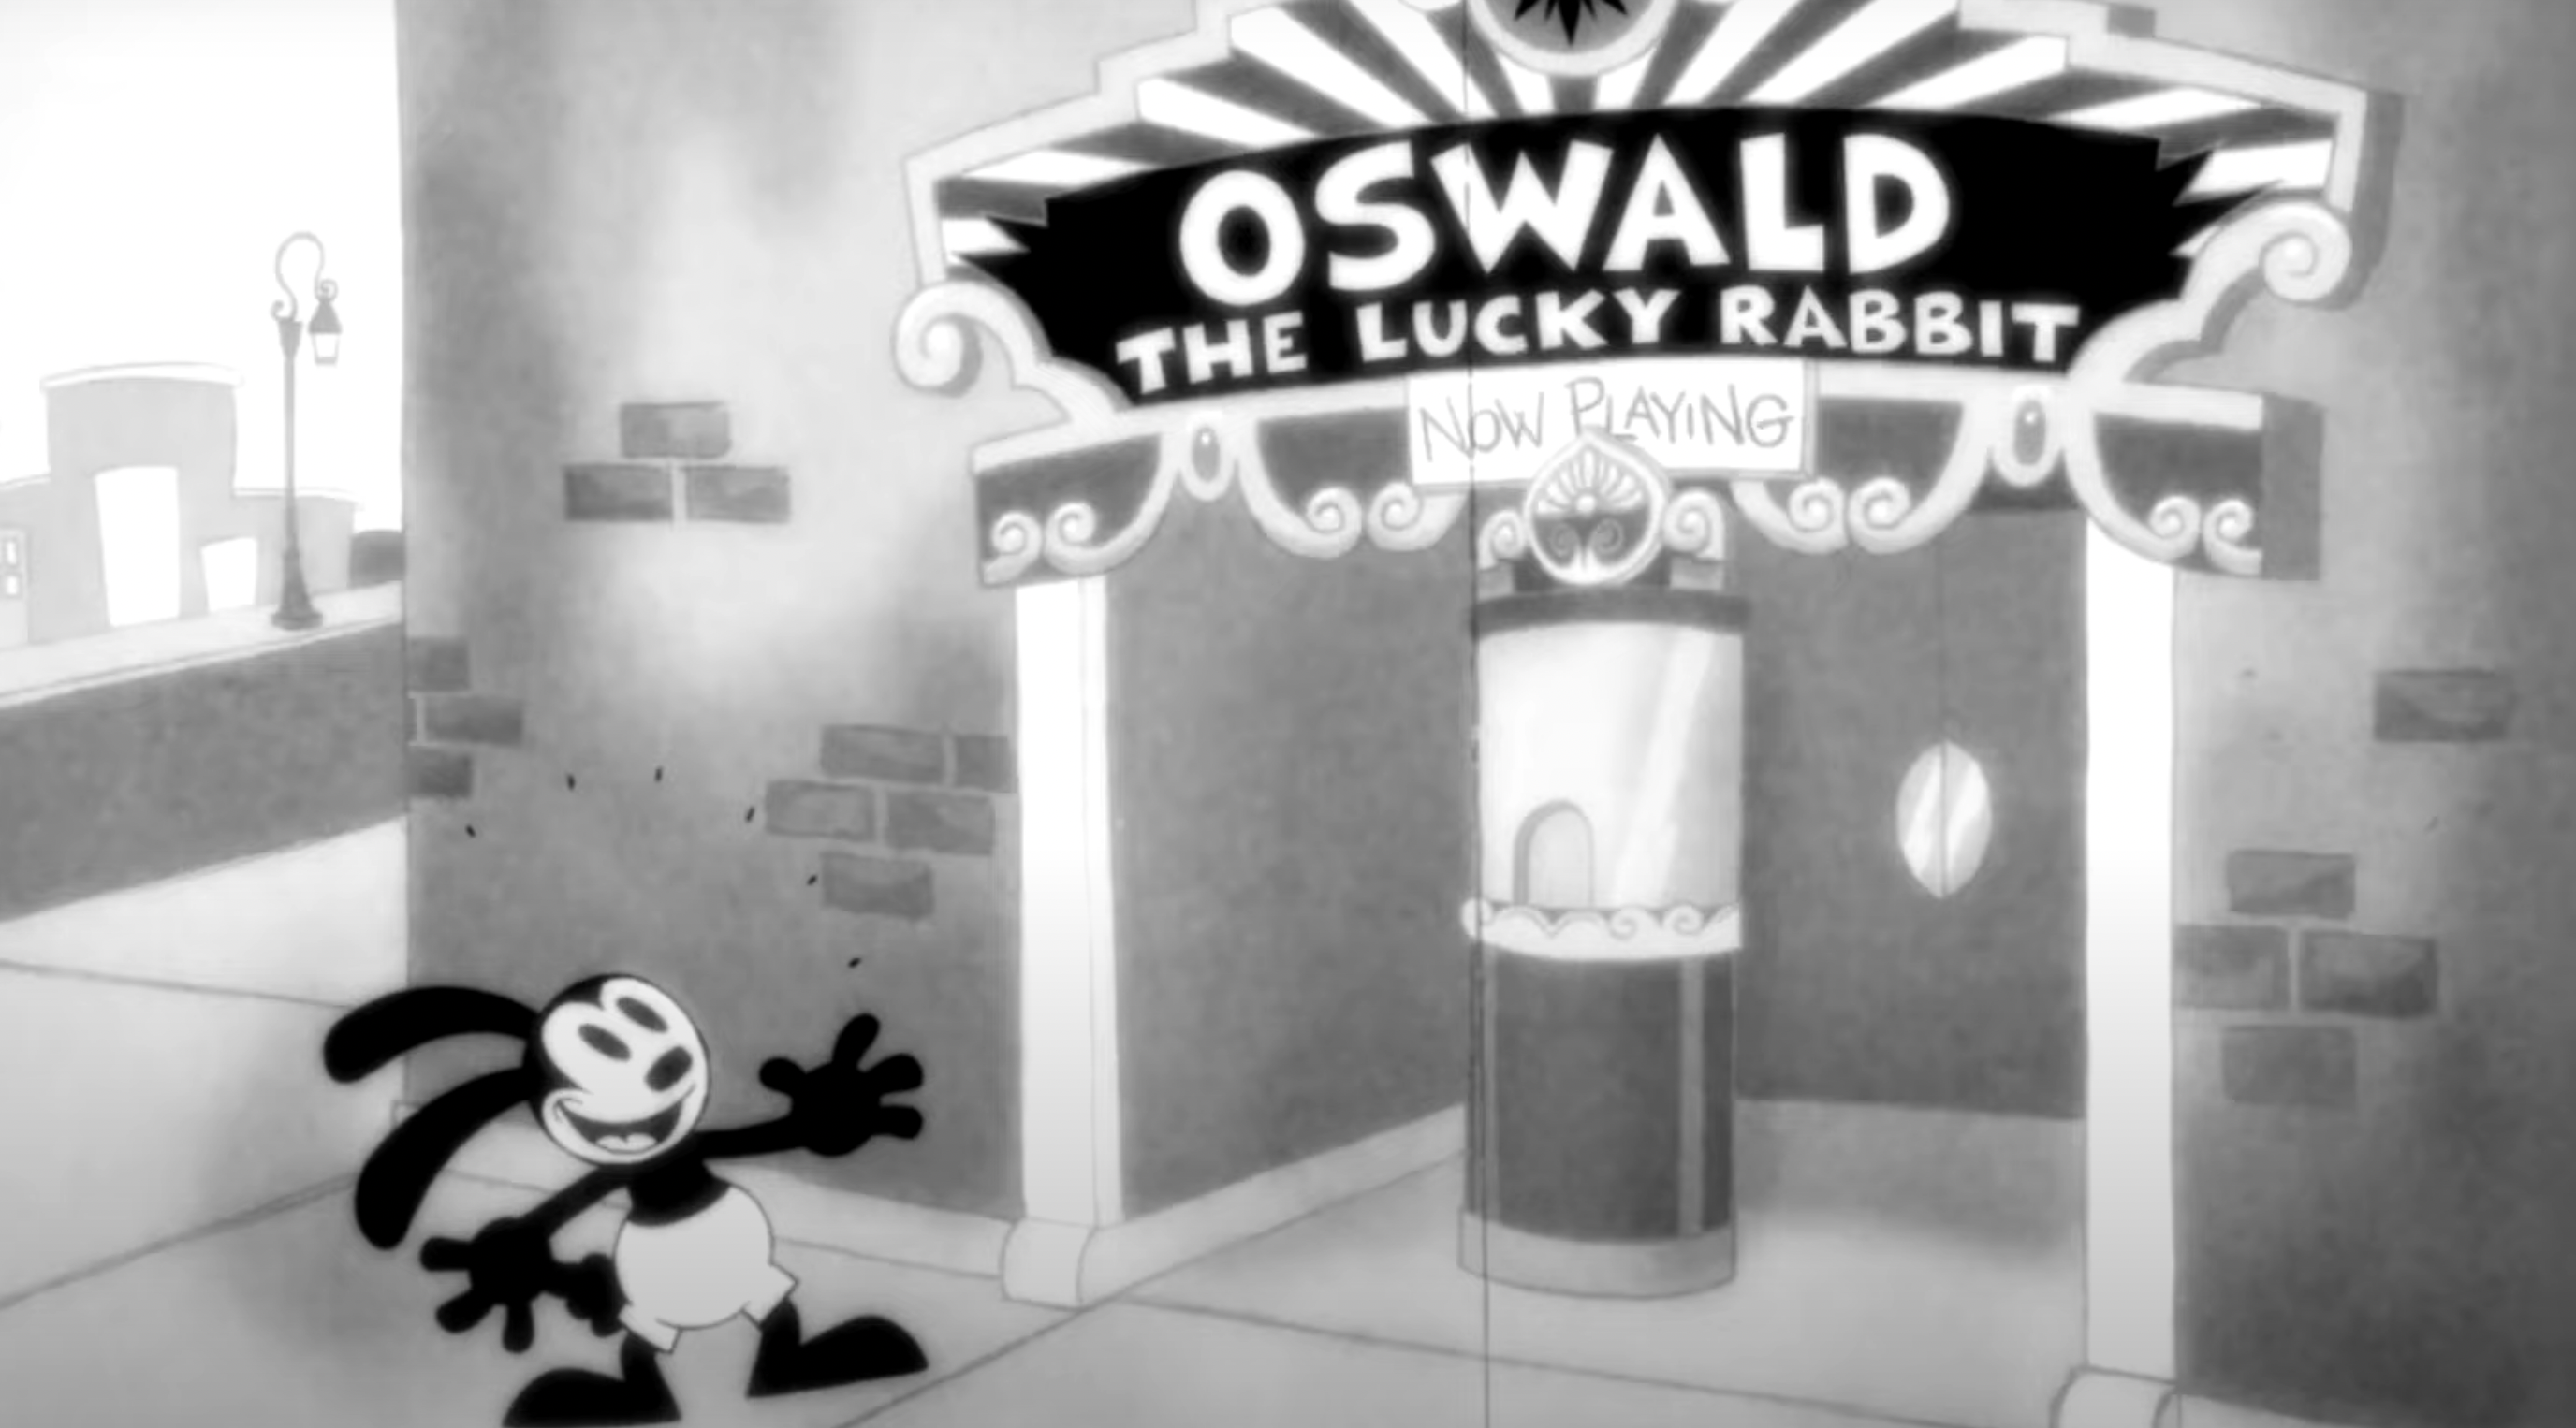 Disney Debuts New Oswald the Lucky Rabbit Short